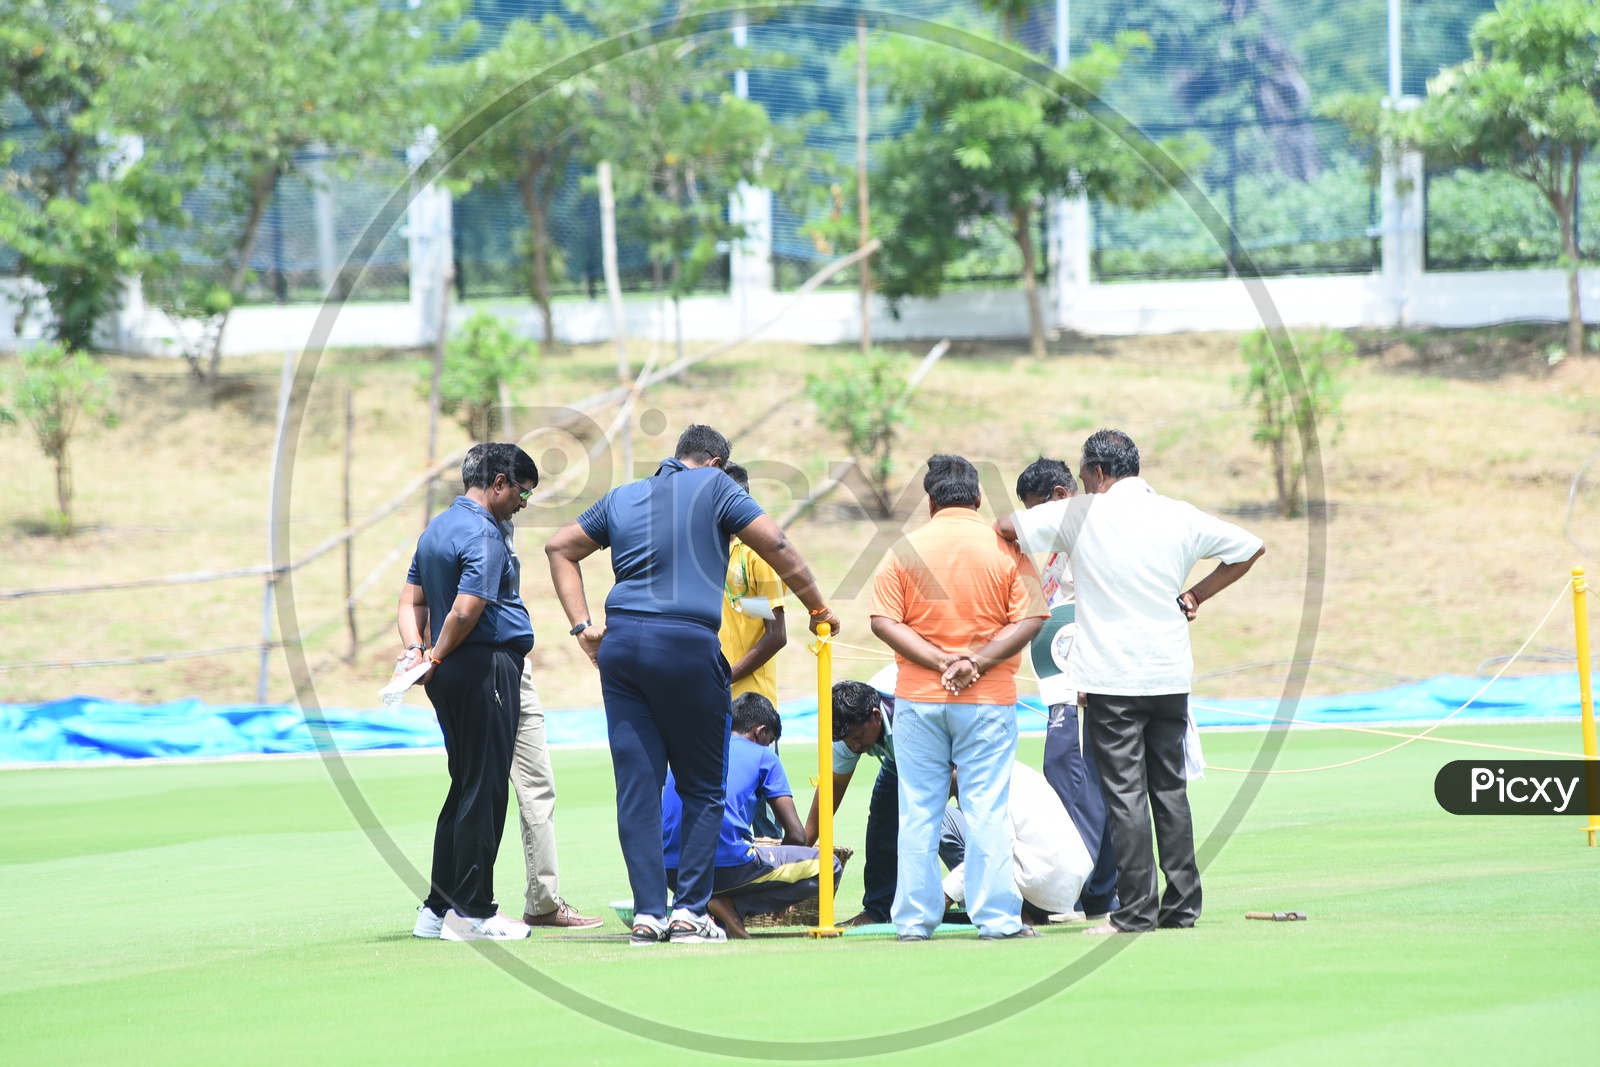 Cricket pitch checking by the authorities